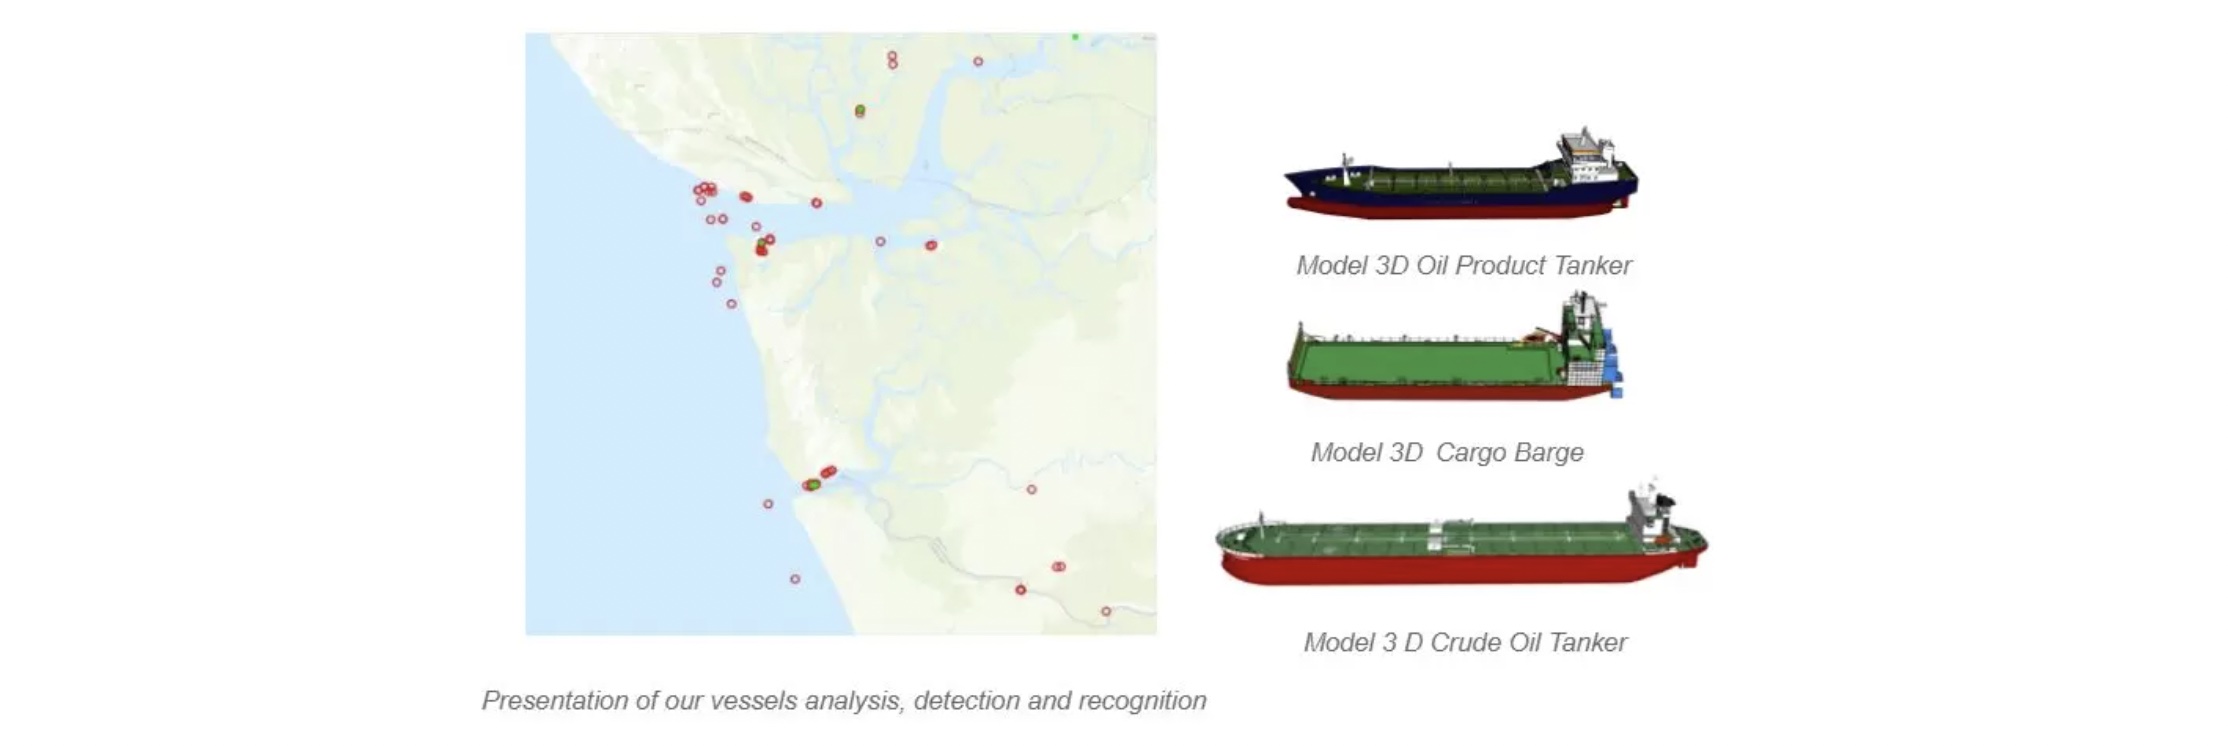 SATIM detection and classification of vessels in the Niger Delta